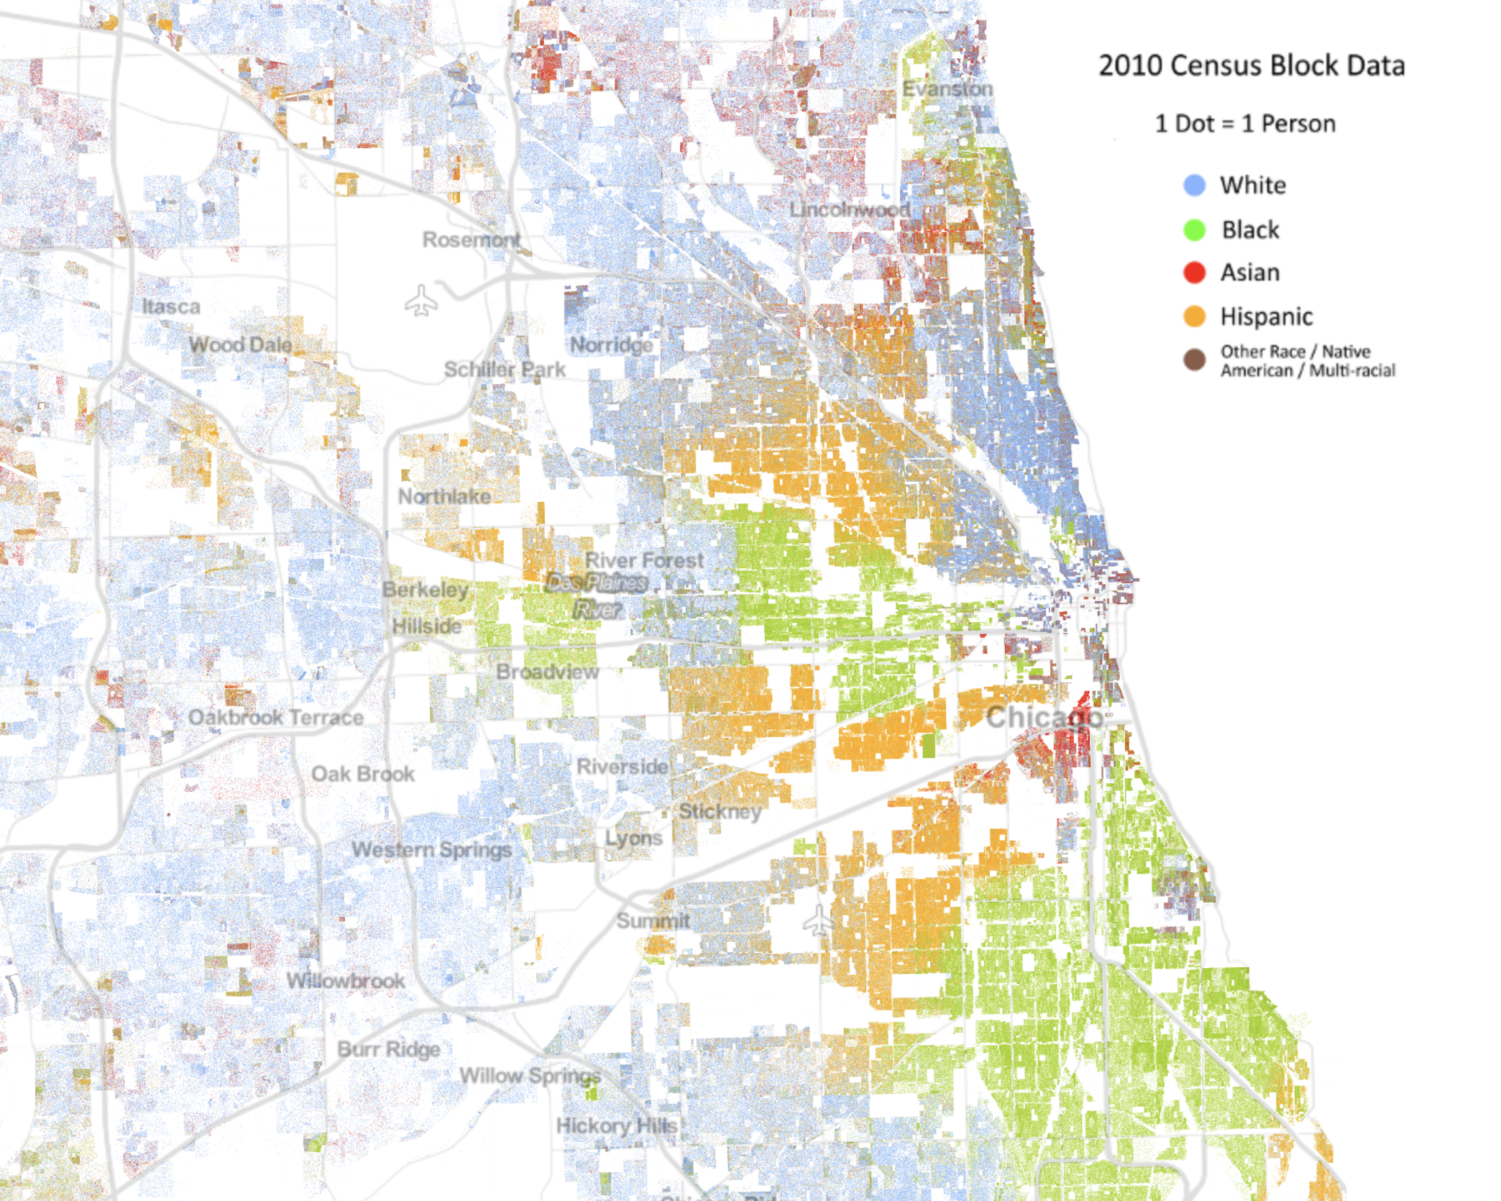 A visualization of Chicago's racial segregation based on 2010 census data.